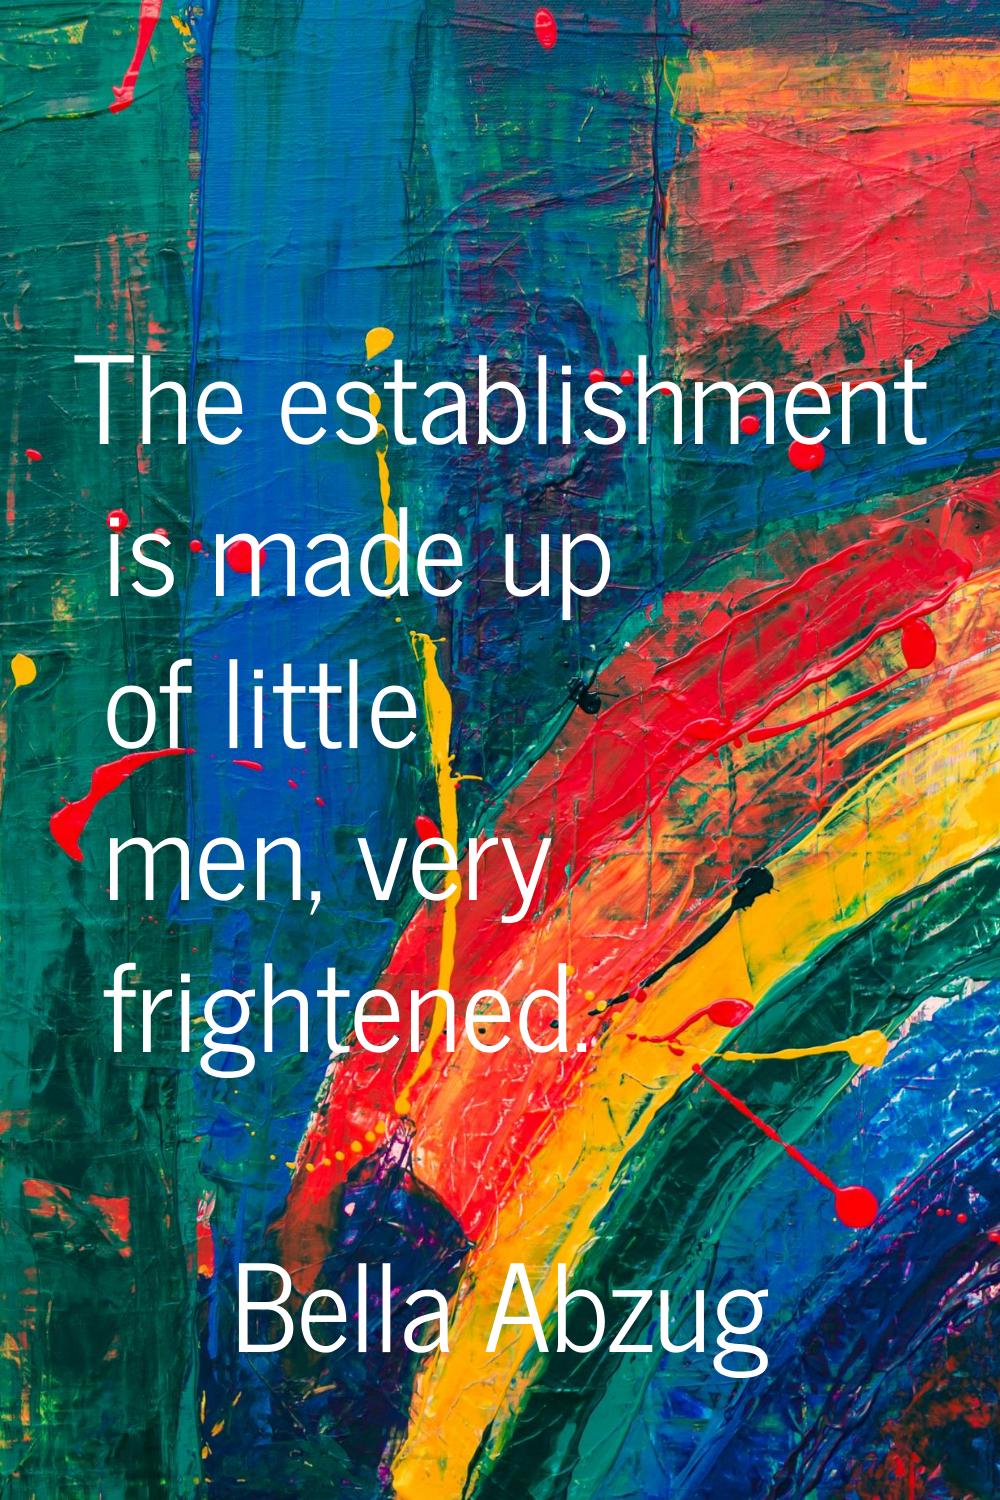 The establishment is made up of little men, very frightened.